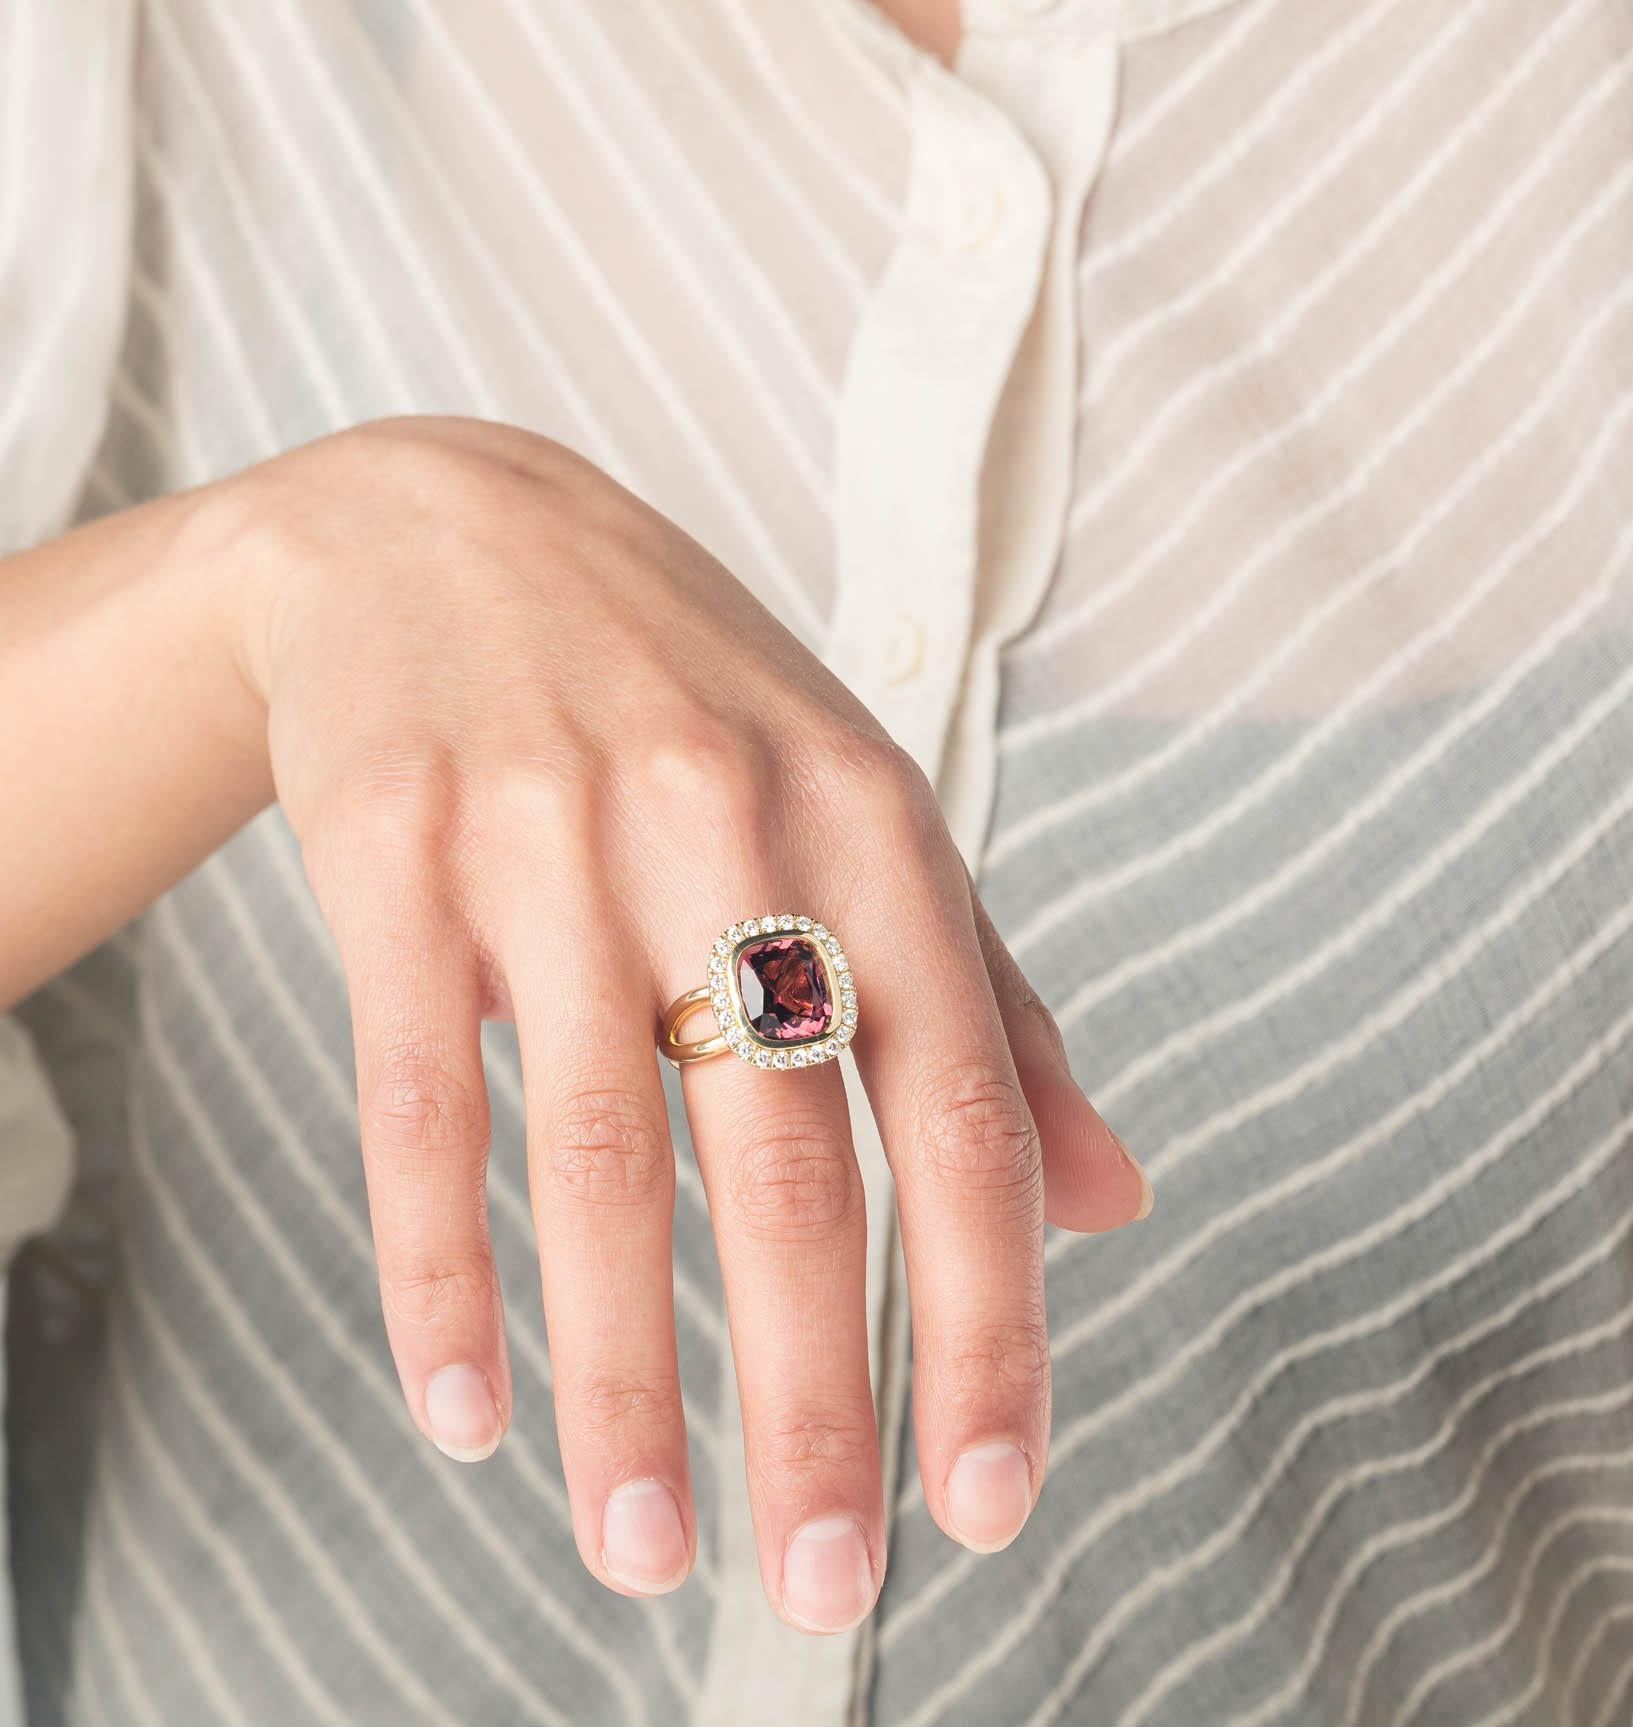 Playful Pink Ring with deep pink Tourmaline and 24 Diamonds  Cober Jewellery

Discover the Exquisite Beauty of Cober Jewellery!
Welcome to Cober Jewellery, where we bring you the finest and most exquisite pieces that are designed to captivate your